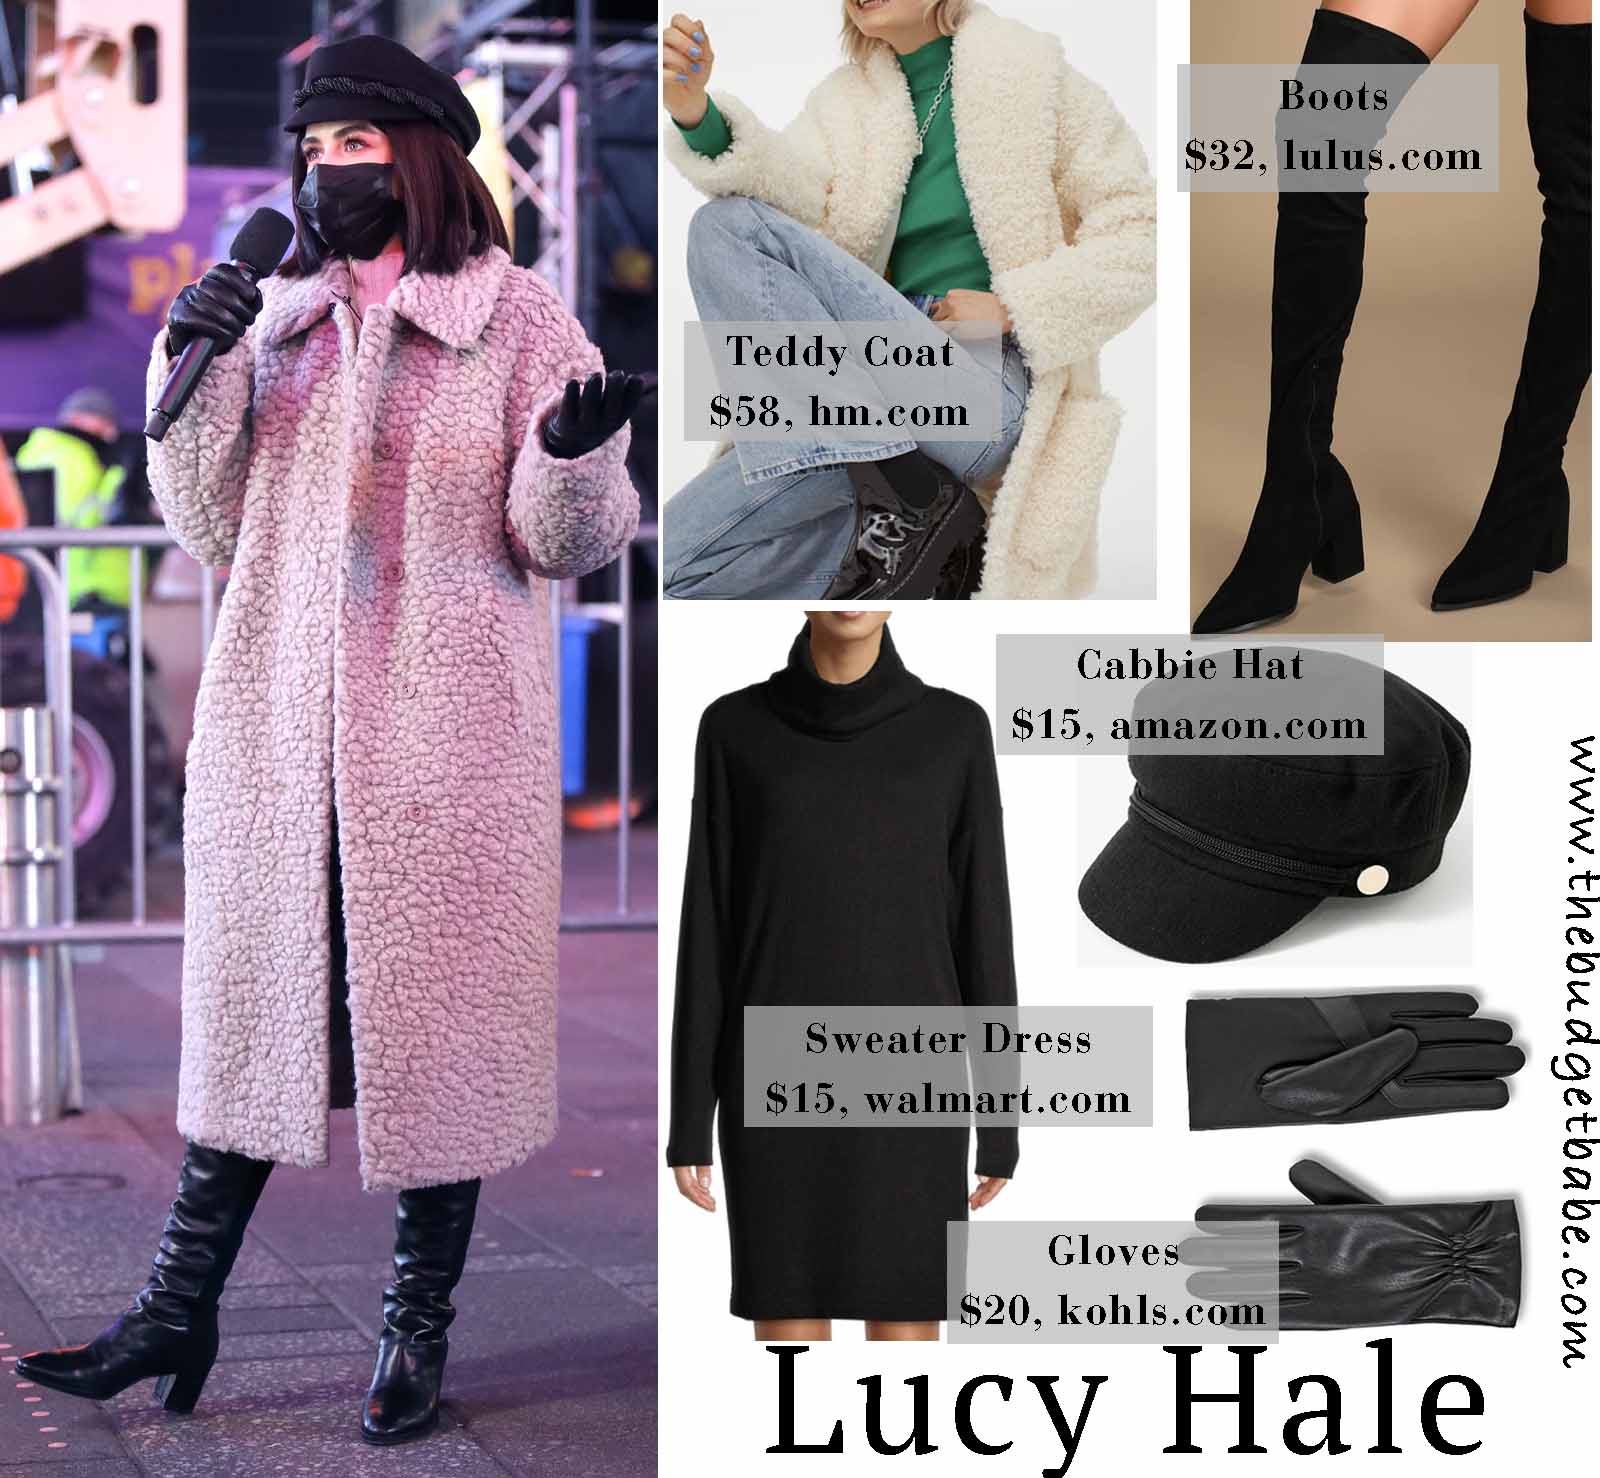 Lucy's outerwear looks so cozy!